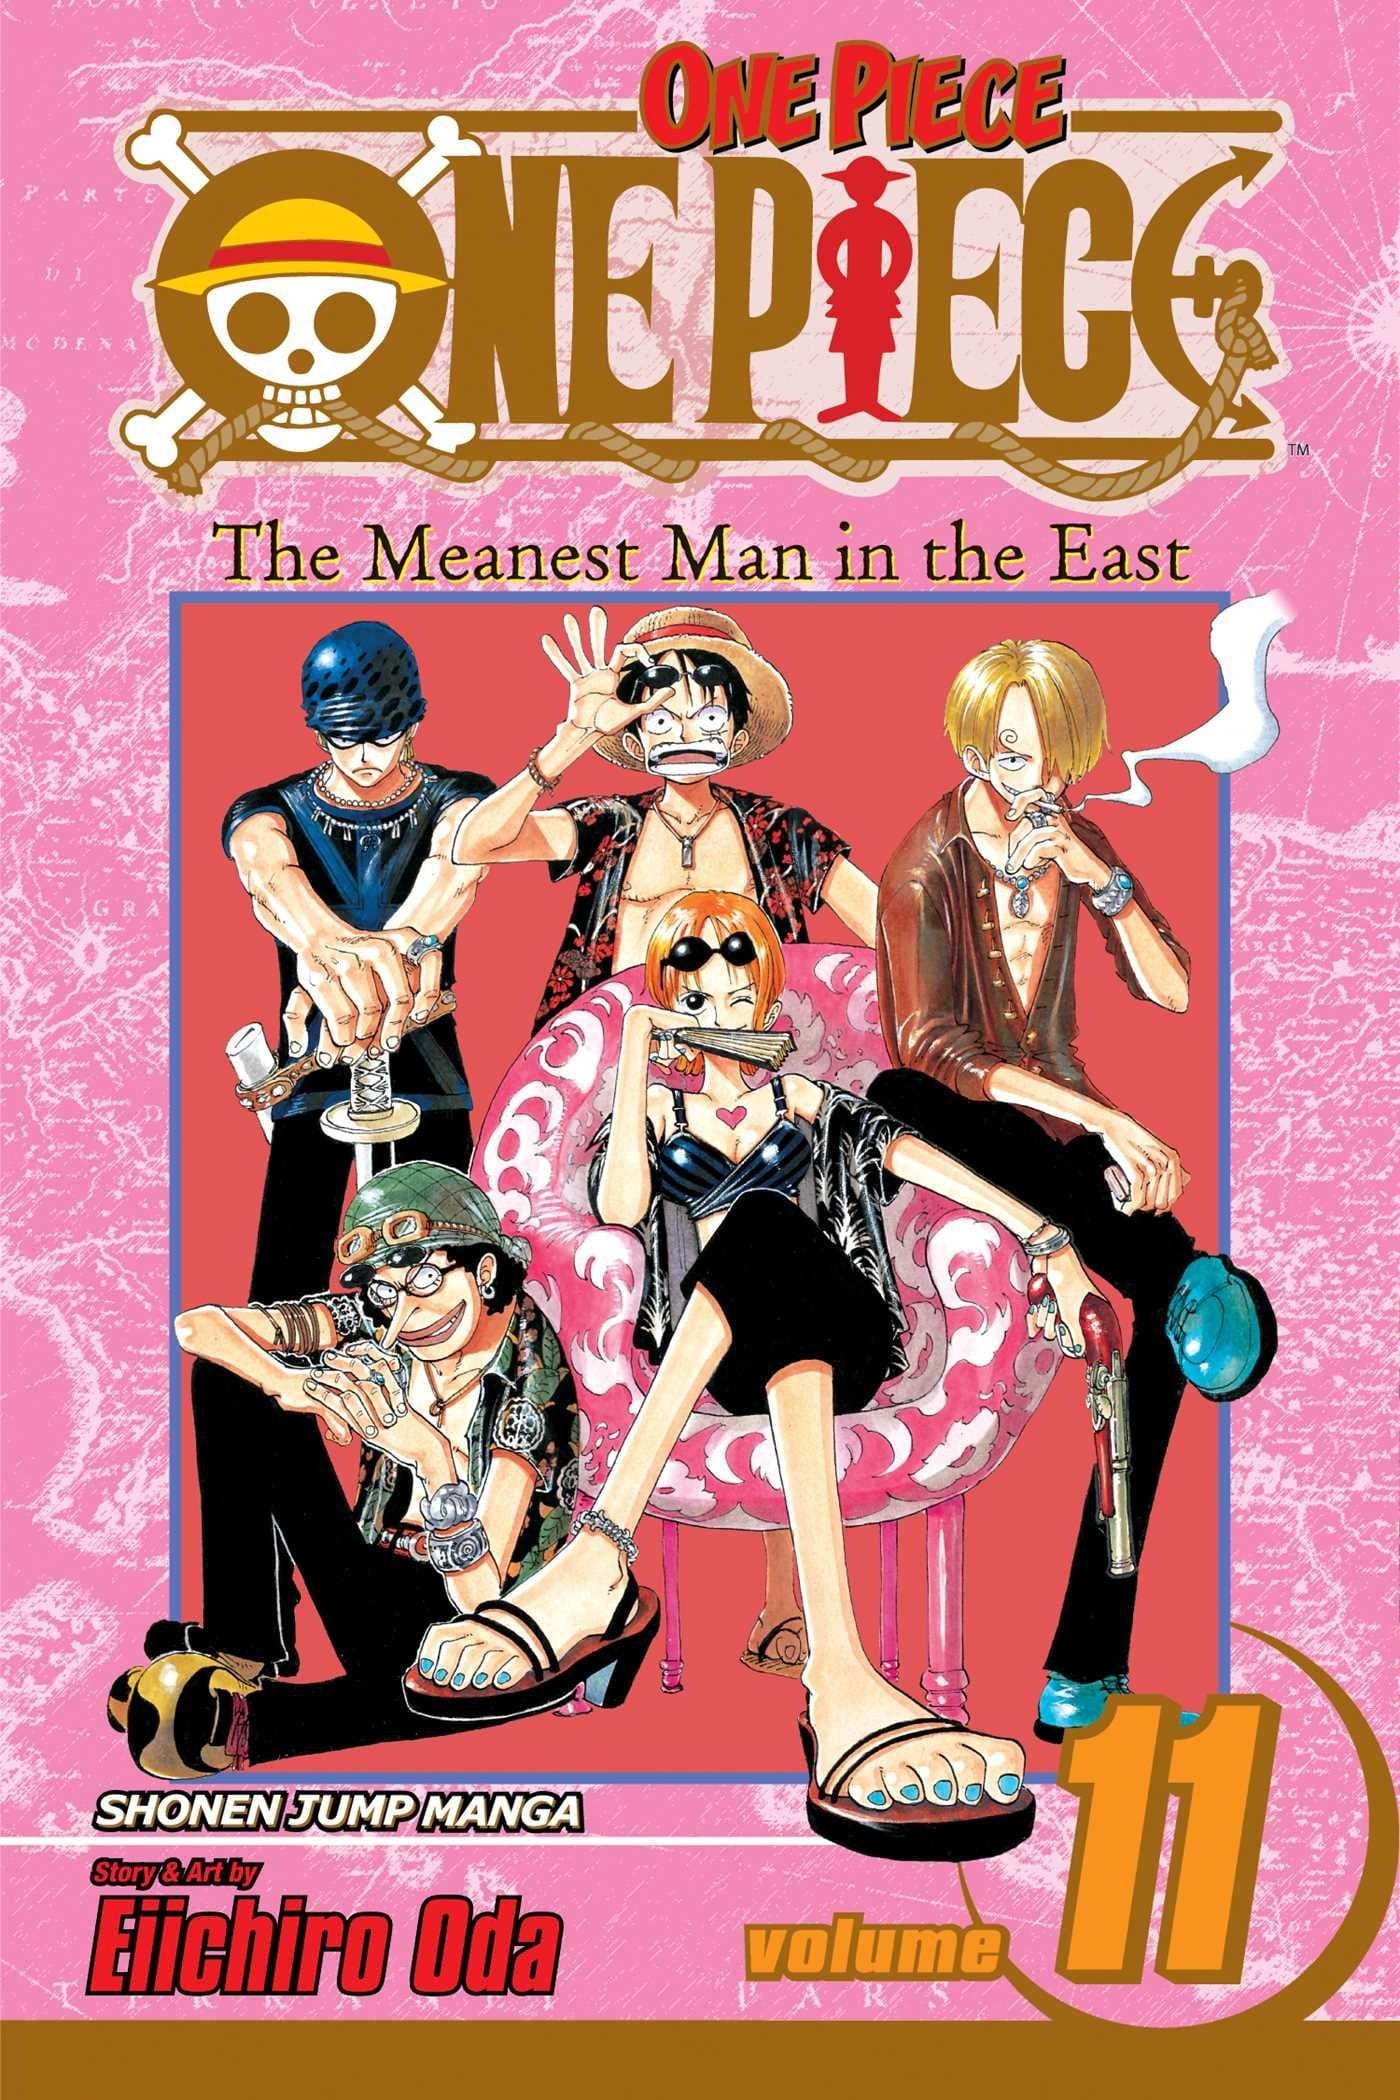 One Piece Vol. 11: Meanest Men in the East - Third Eye